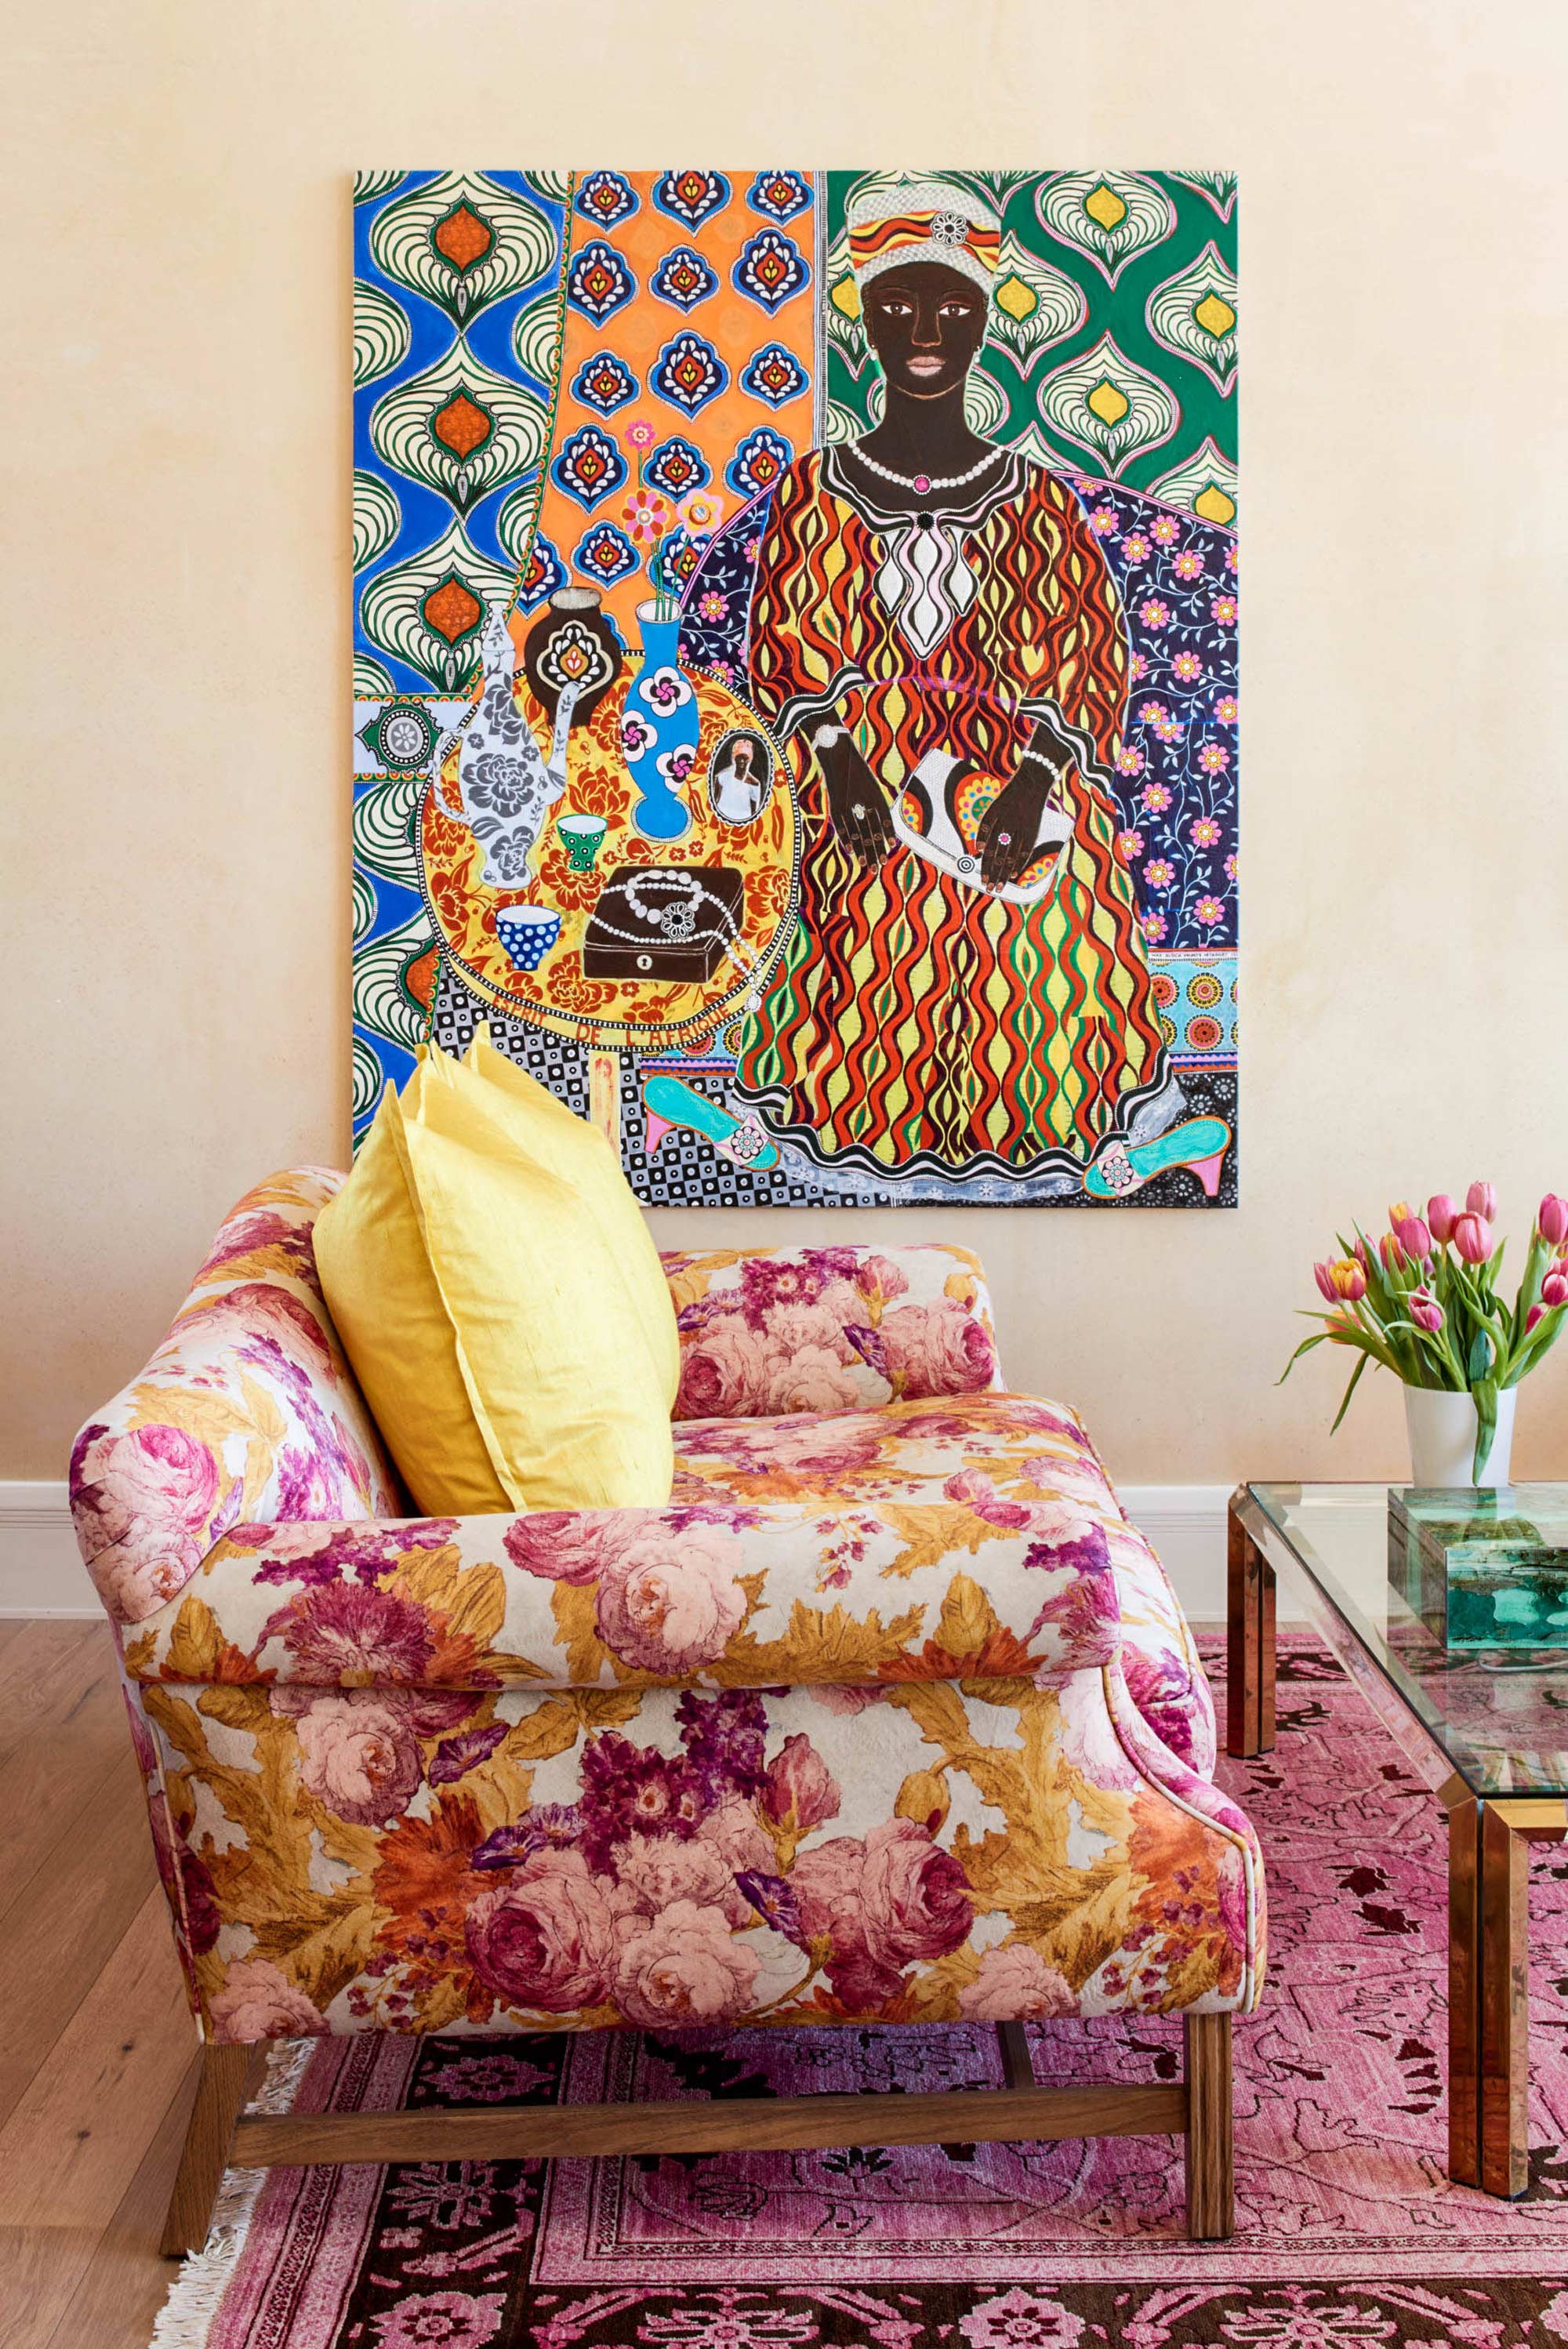 Room with African art on the walls and soft furnishings